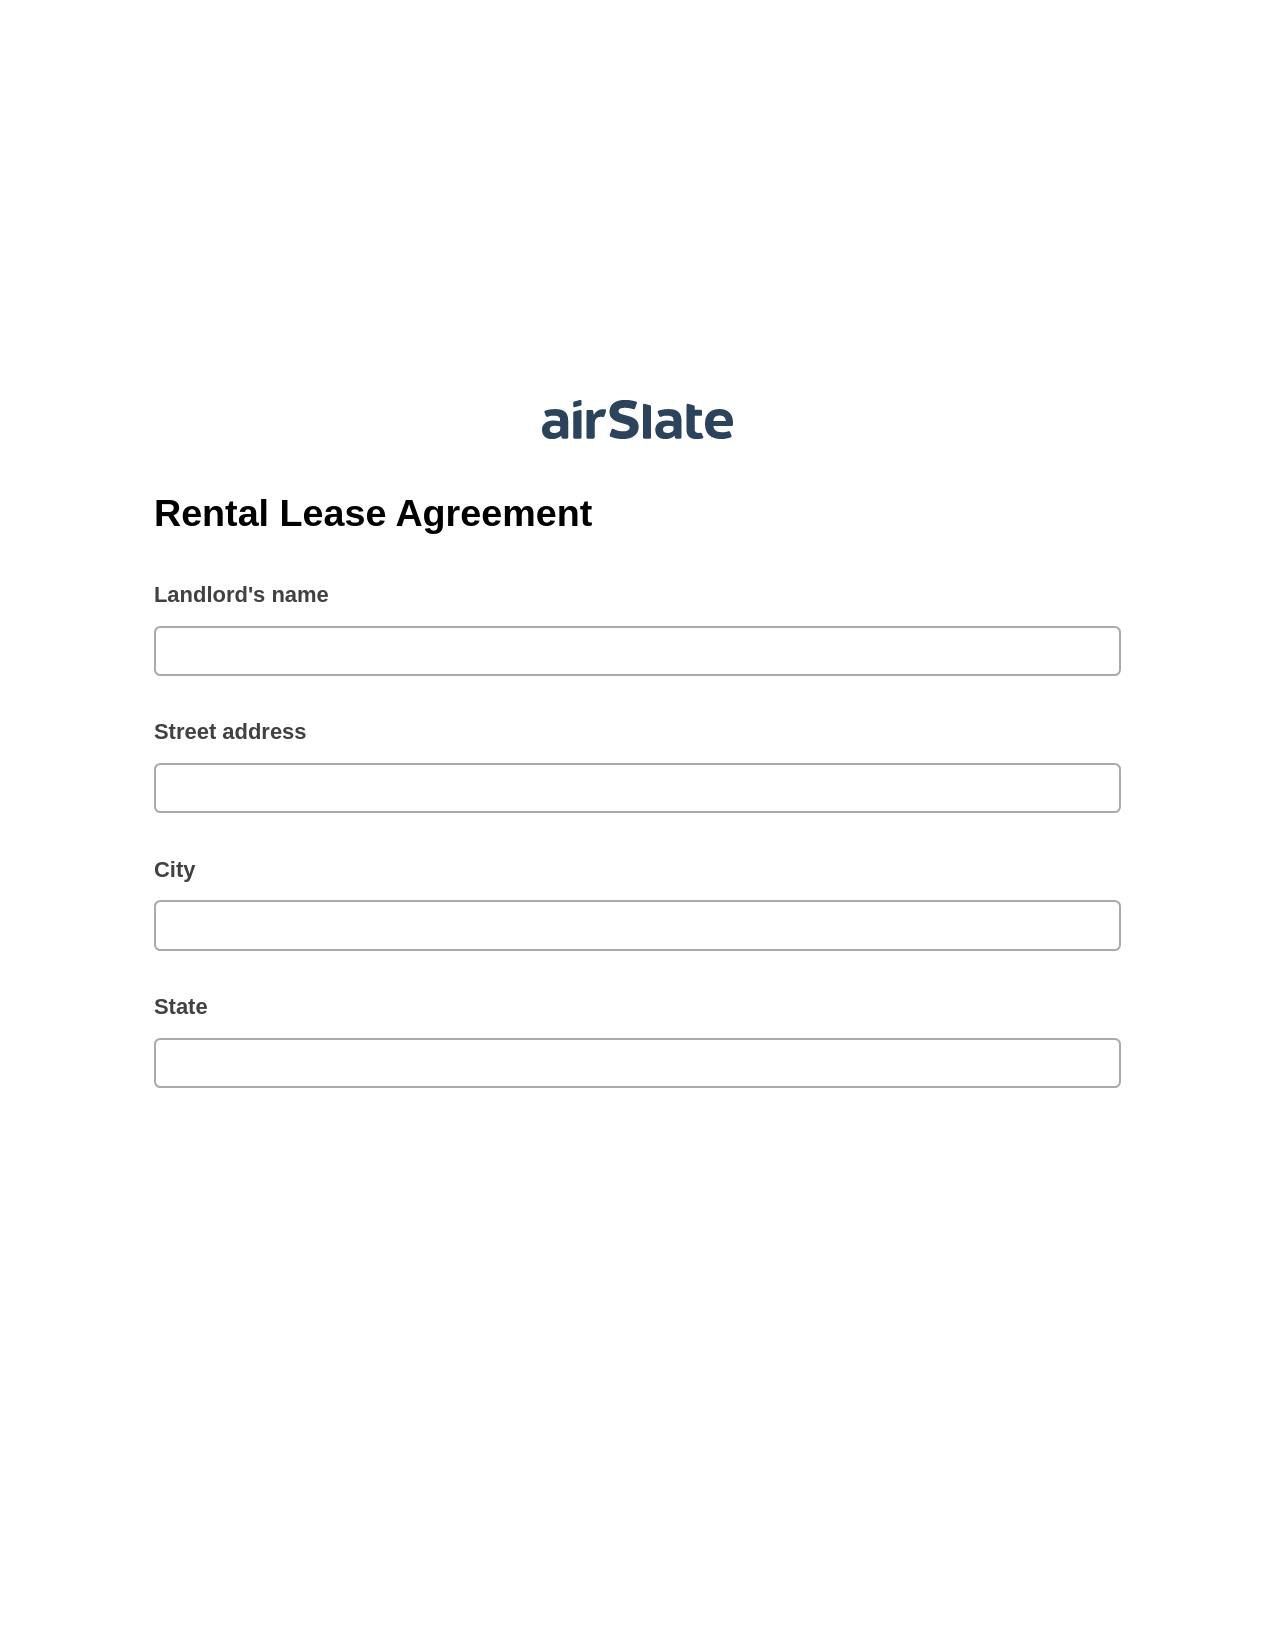 Rental Lease Agreement Pre-fill Document Bot, Add Tags to Slate Bot, Dropbox Bot